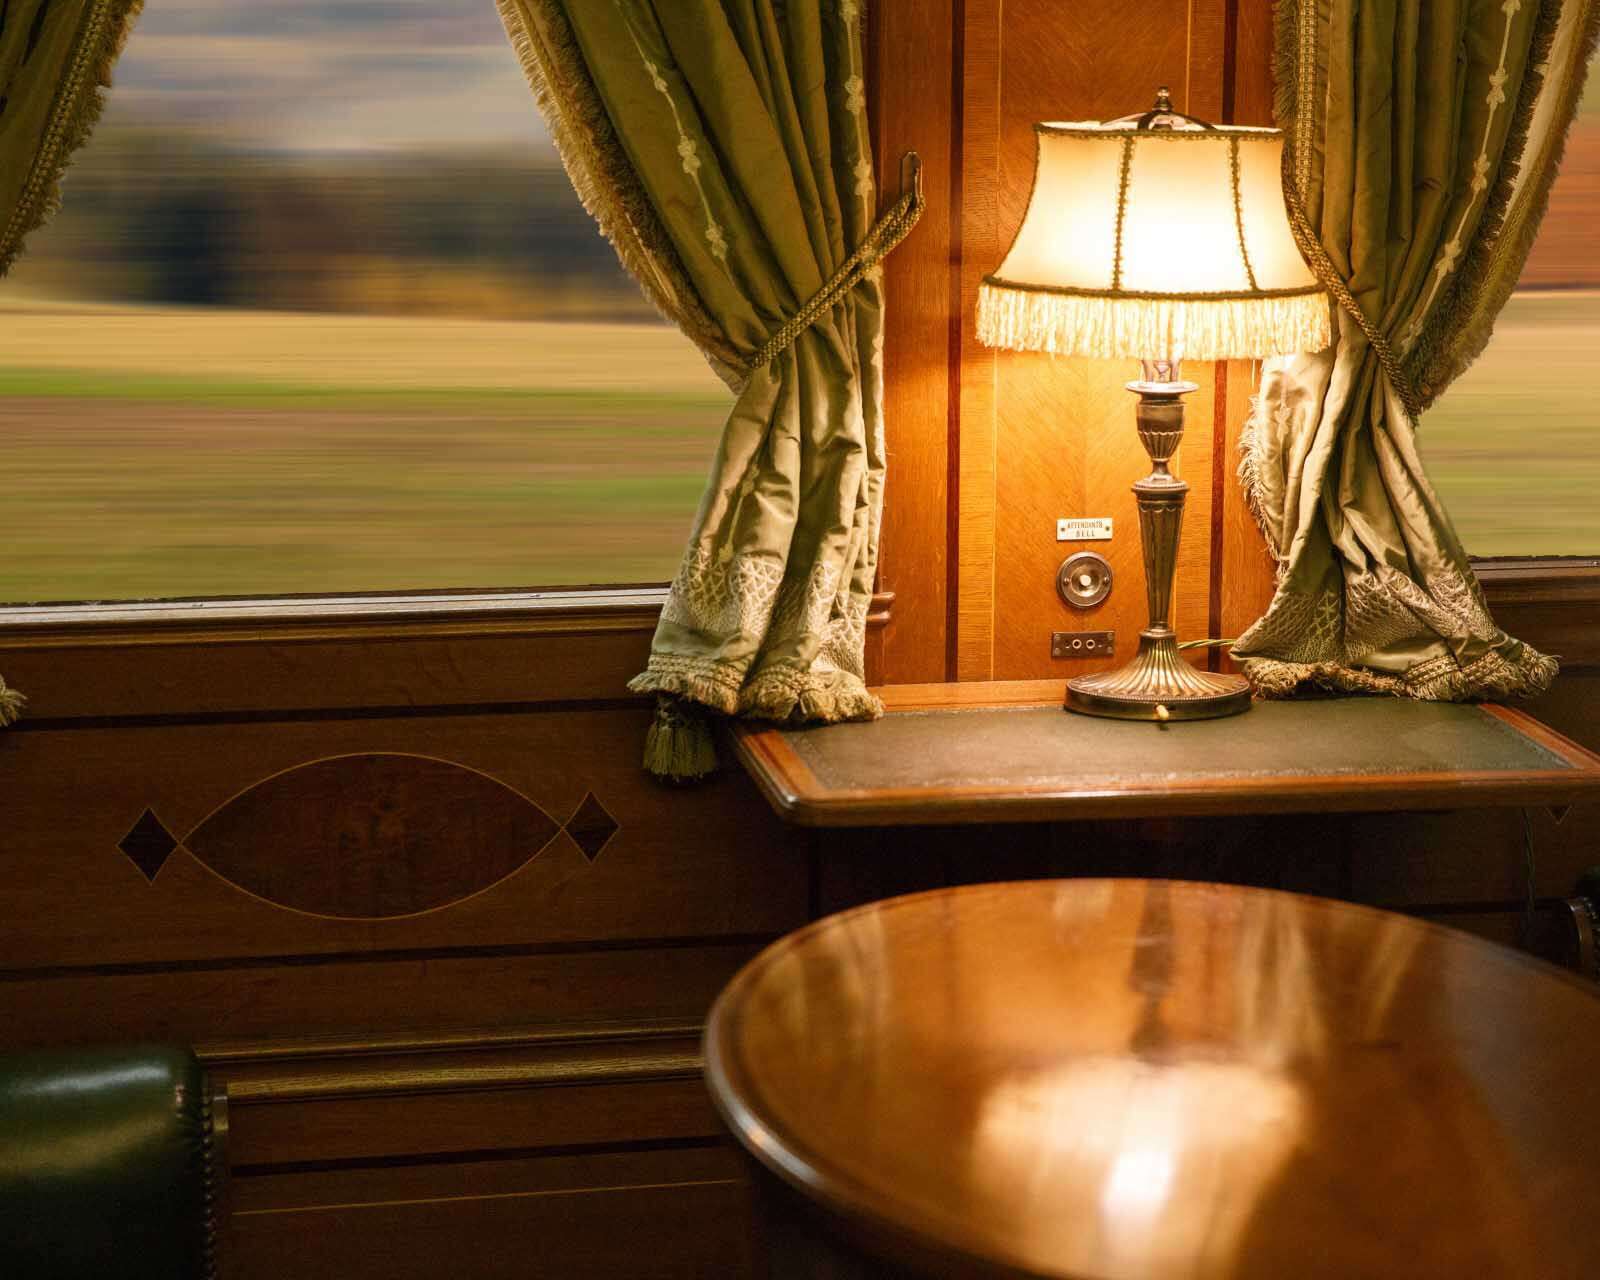 Is this the most luxurious train carriage in the world?